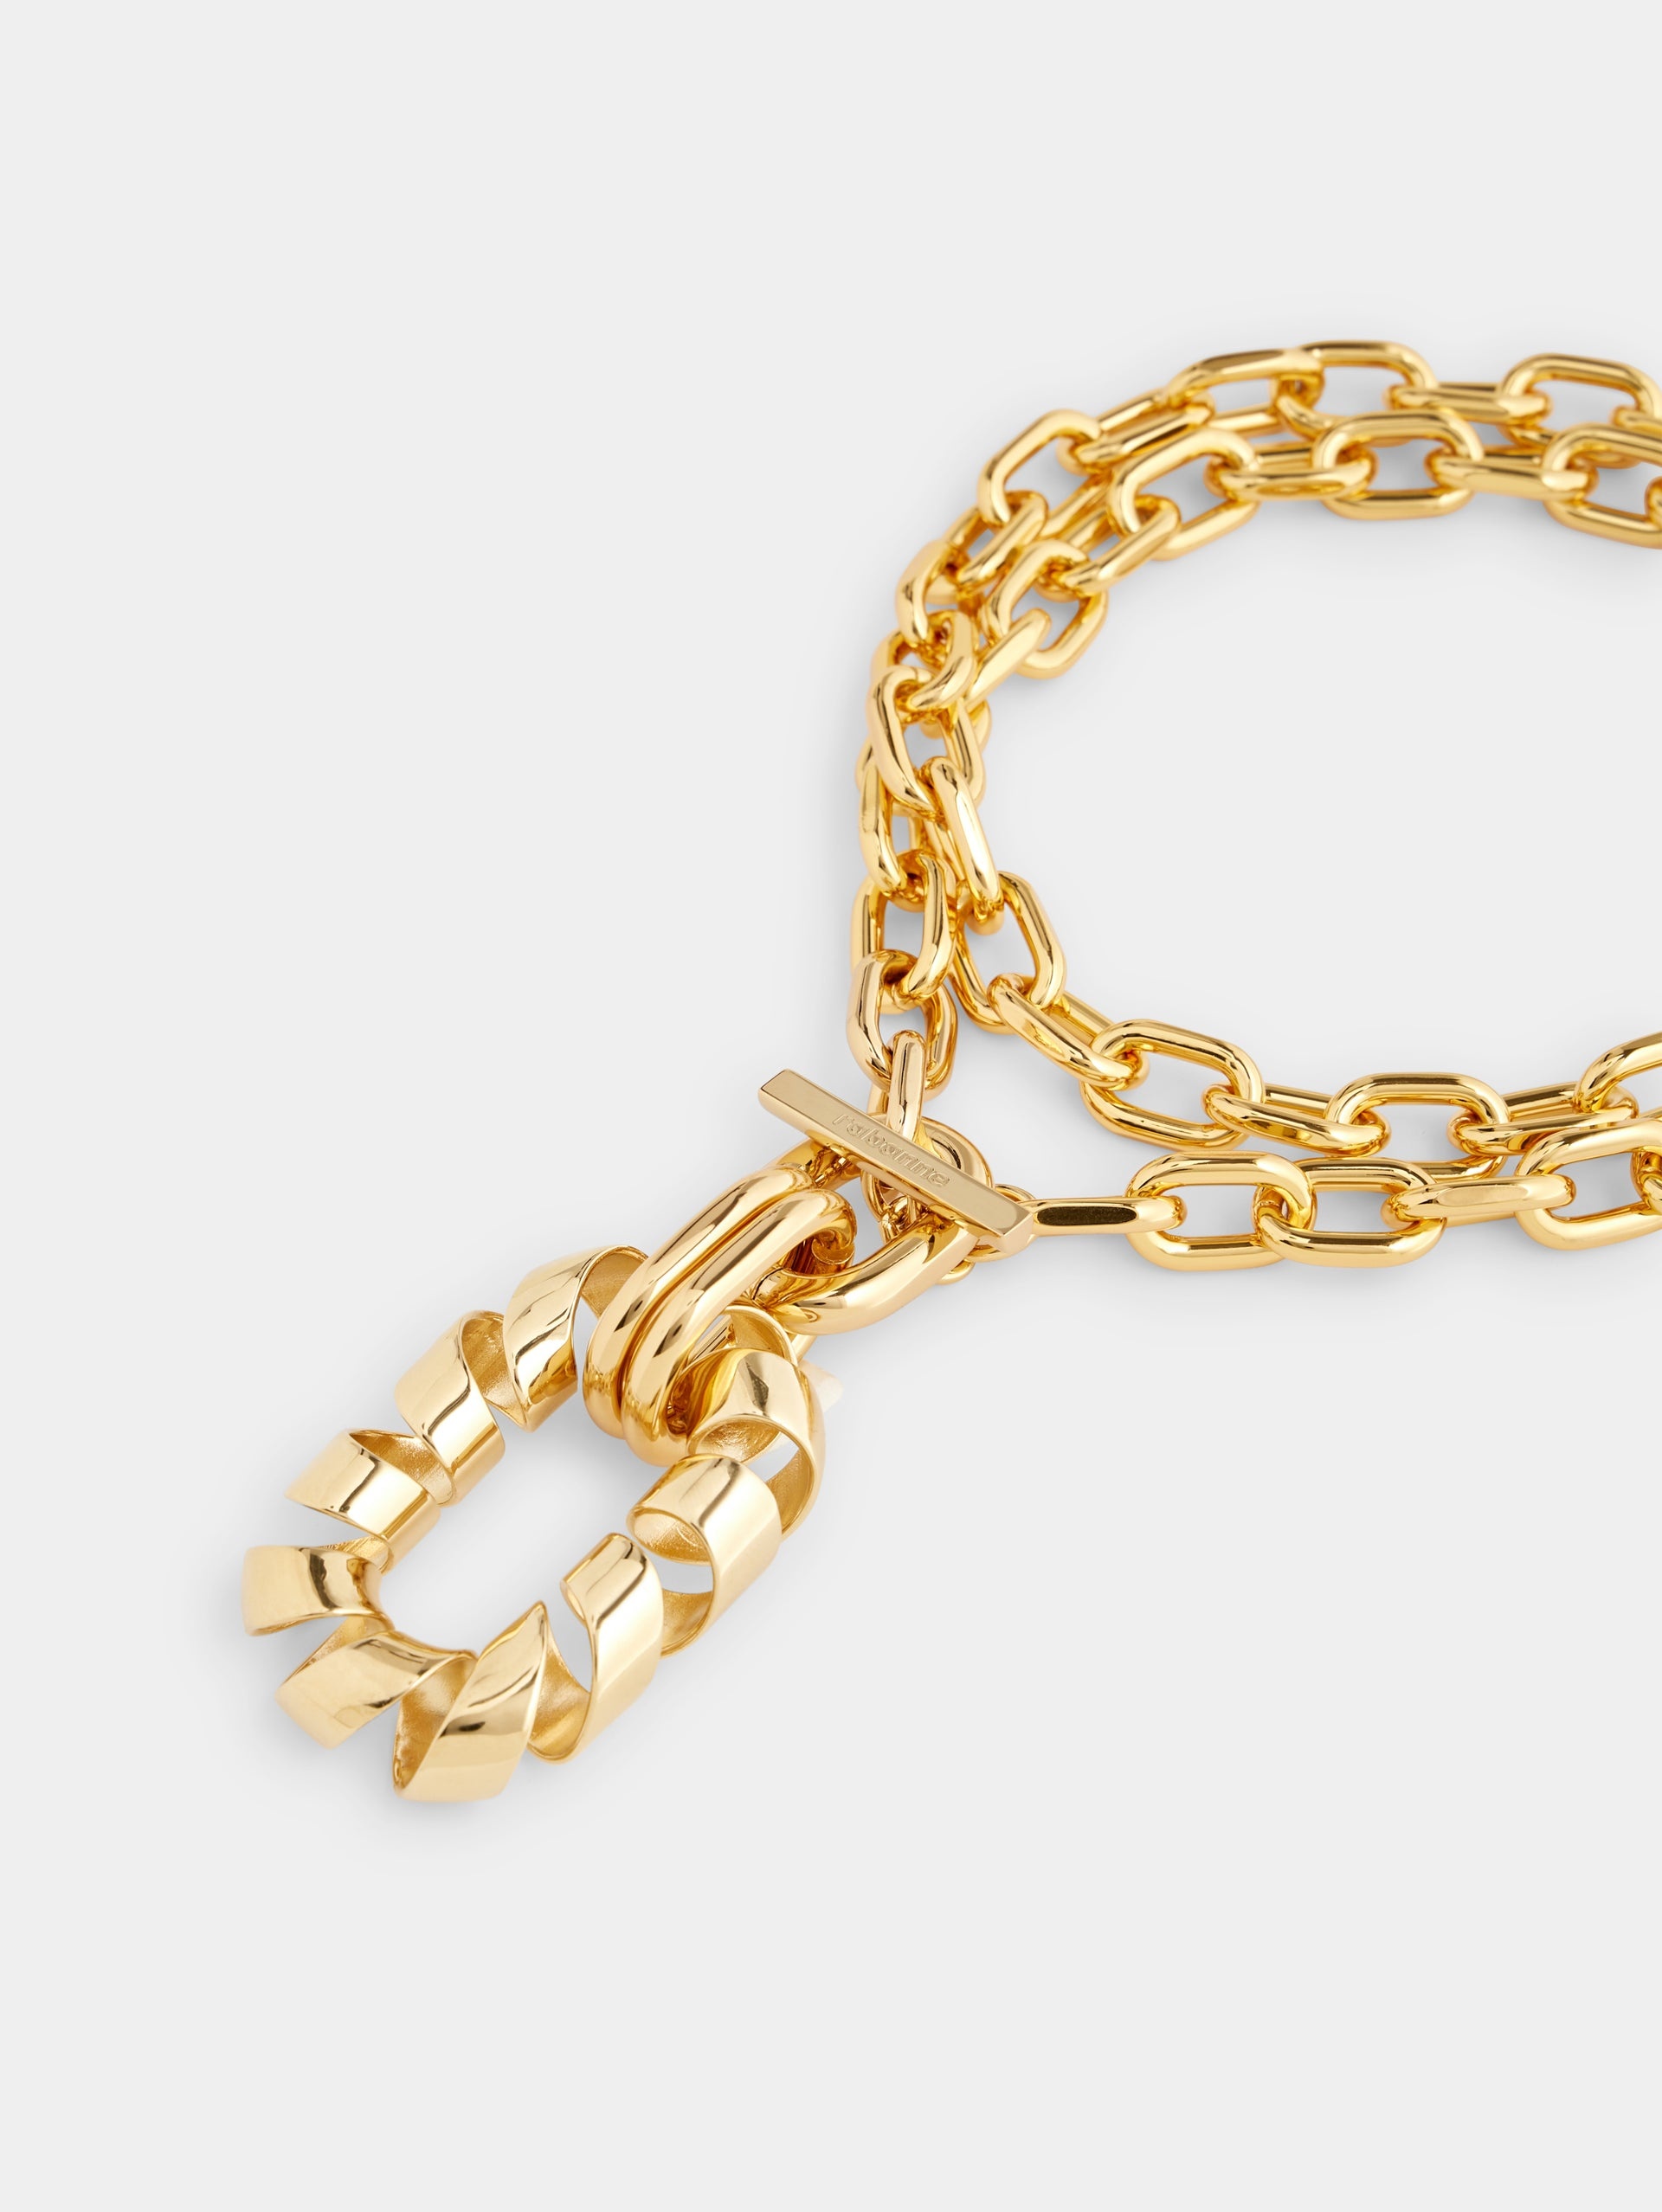 GOLD DOUBLE XL LINK TWIST NECKLACE WITH PENDANT - 3